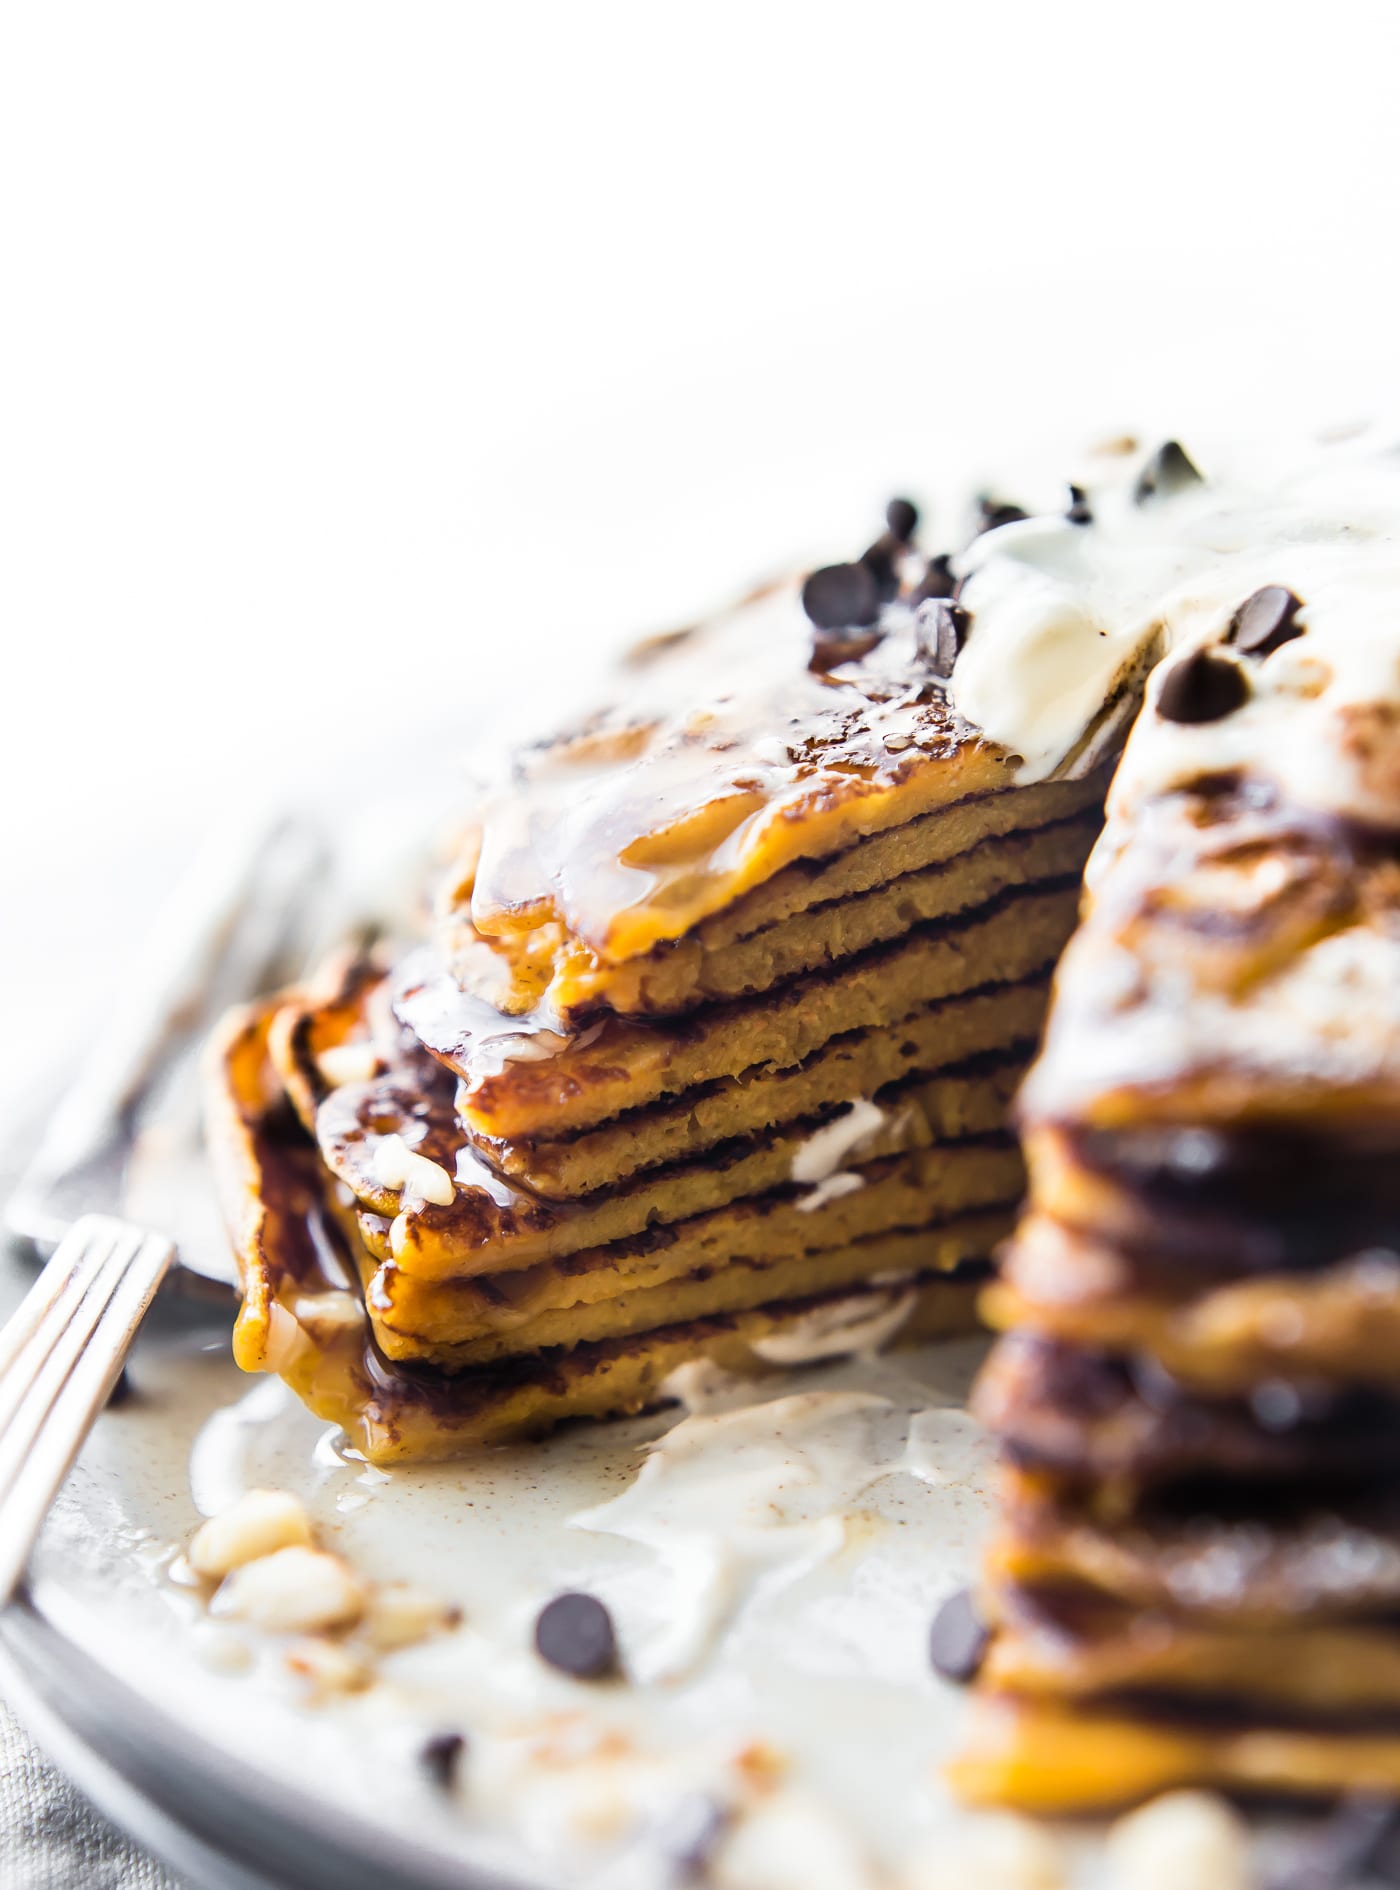 A Flourless Carrot Cake Yogurt Pancakes recipe that’s perfect for breakfast or brunch. These Flourless Carrot "Cake" Yogurt Pancakes are too good to be true! Made with siggi’s vanilla yogurt, making them lower in sugar, gluten free, and protein packed! An easy blender recipe.